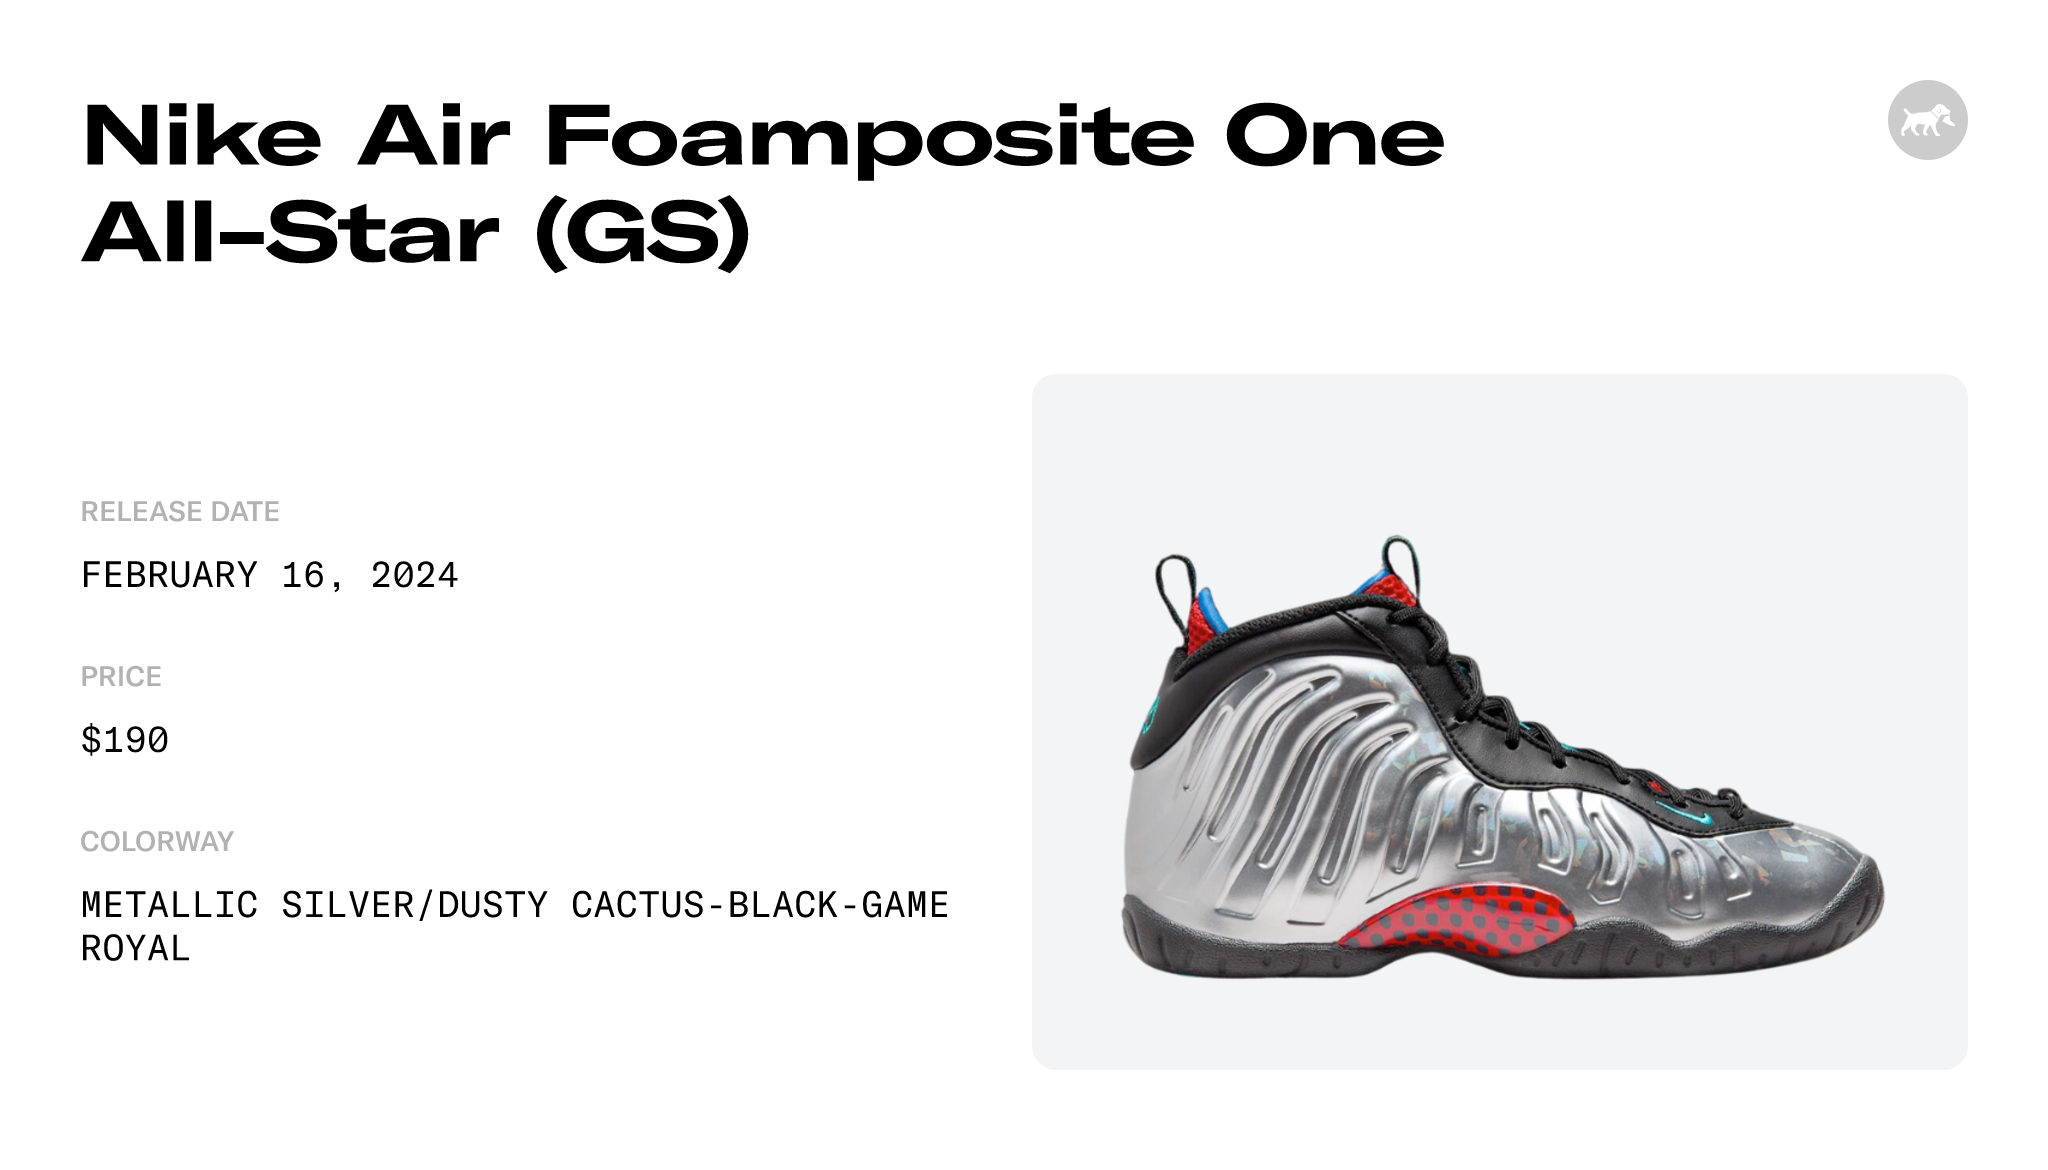 Nike Air Foamposite One All-Star (GS) - FJ3303-001 Raffles and Release Date